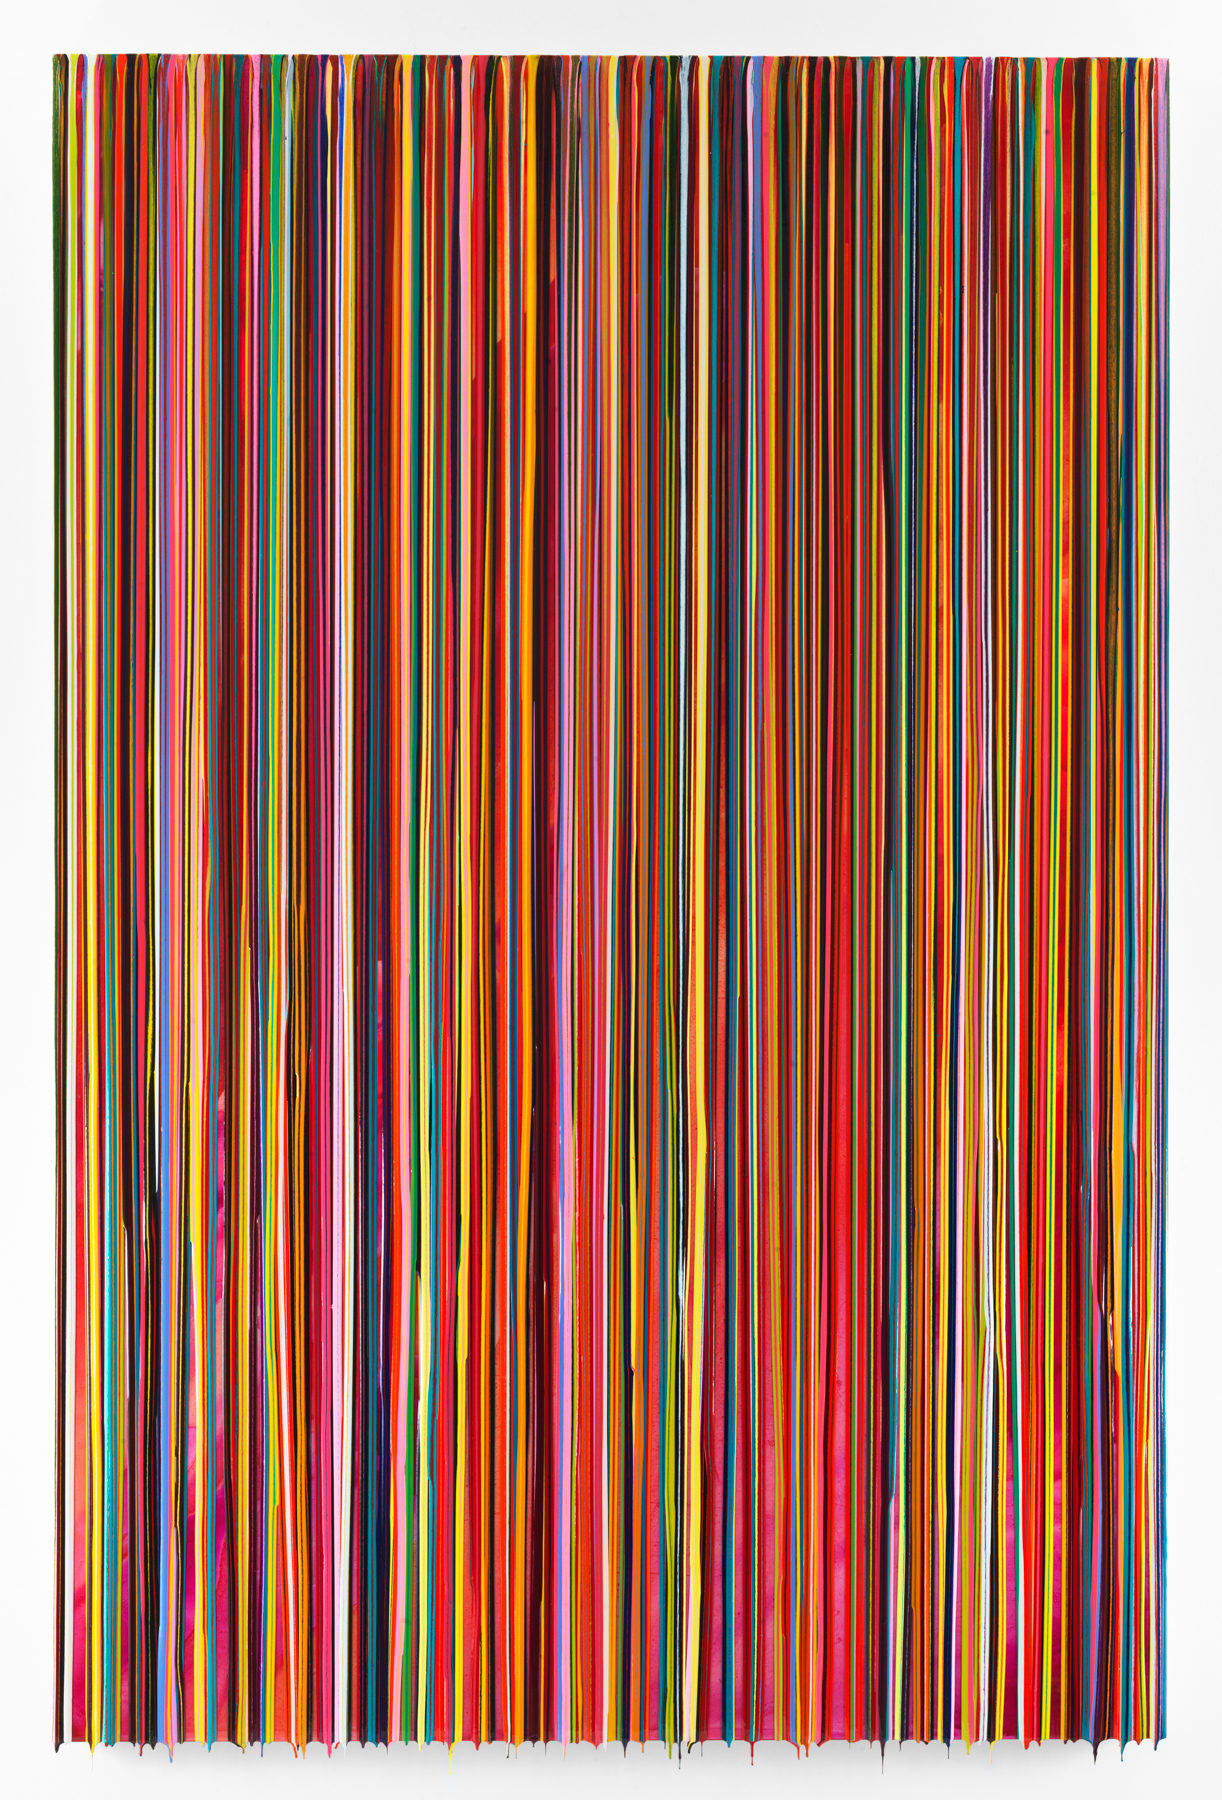 INVALUABLEWASTE, 2016, Epoxy resin and pigments on wood, 90 x 60 inches, 228.6 x 152.4 cm, AMY#28455